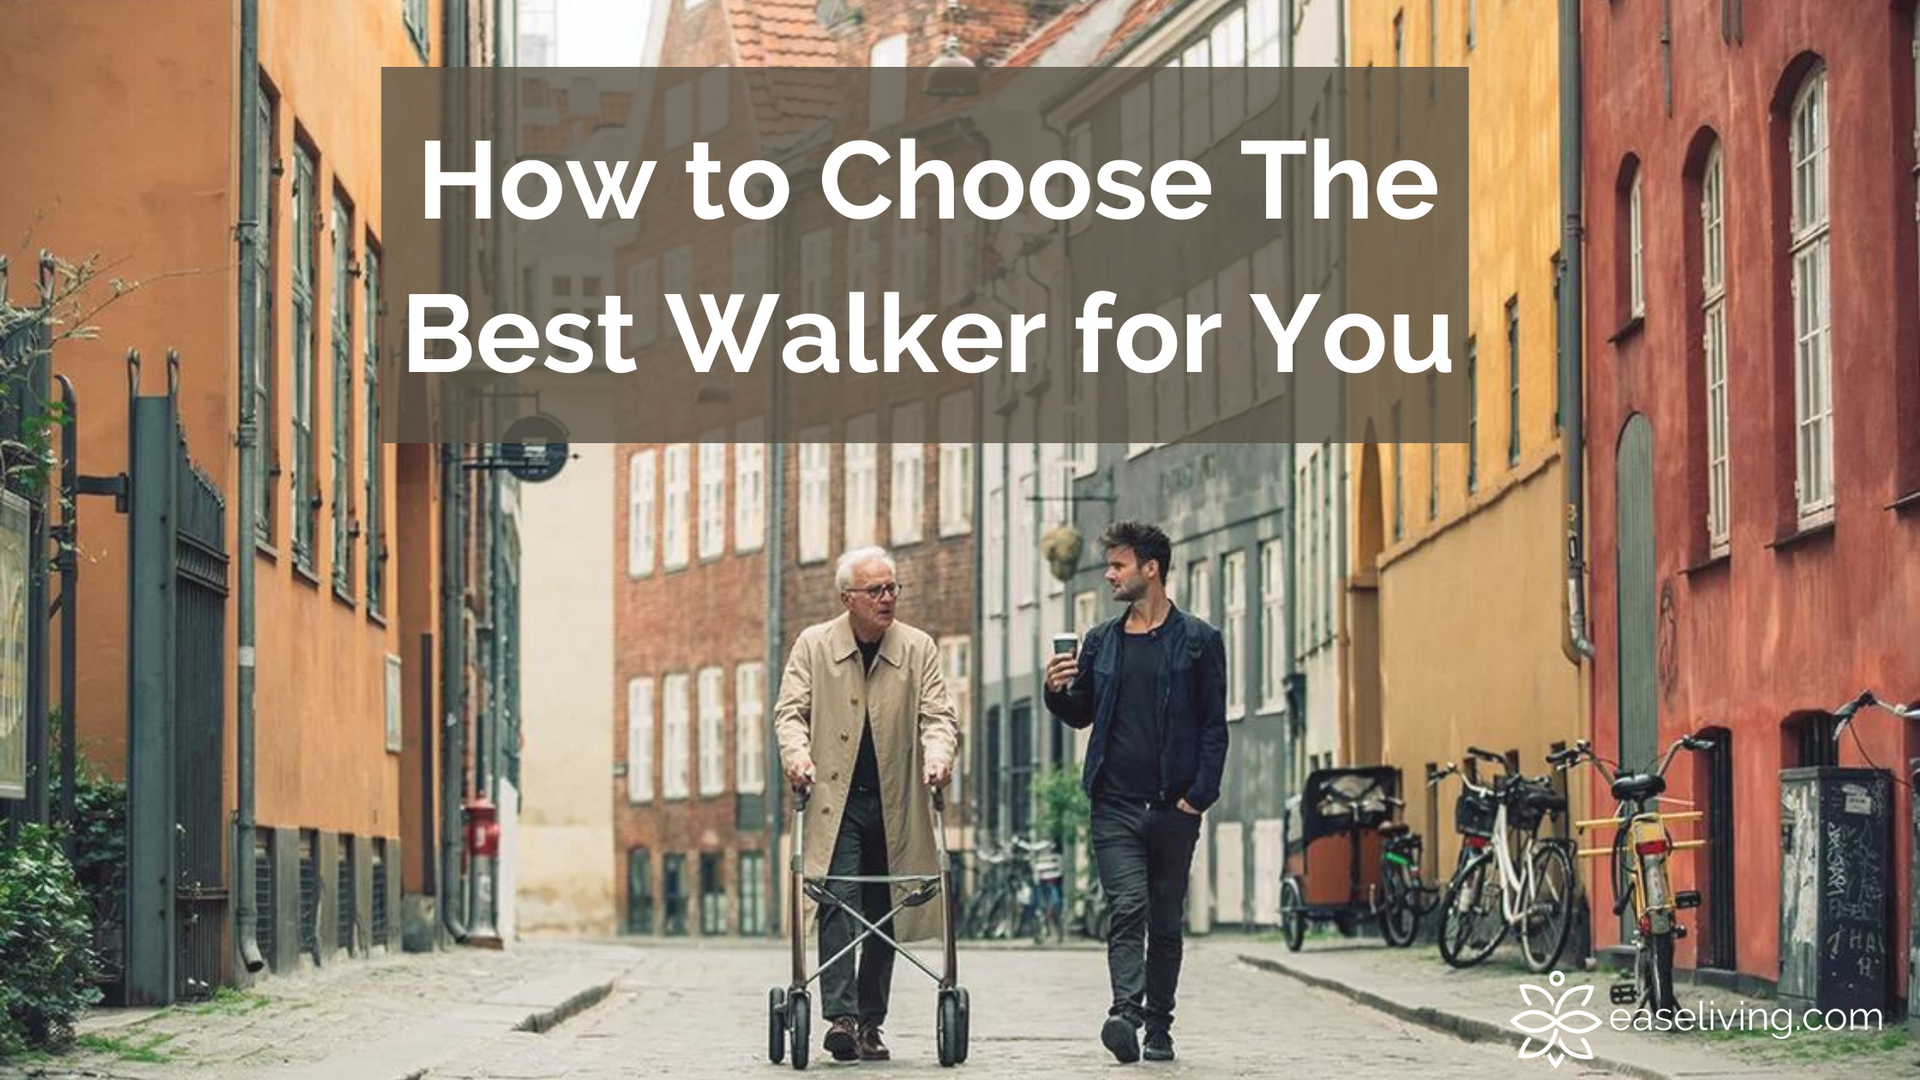 How to Choose the Best Walker